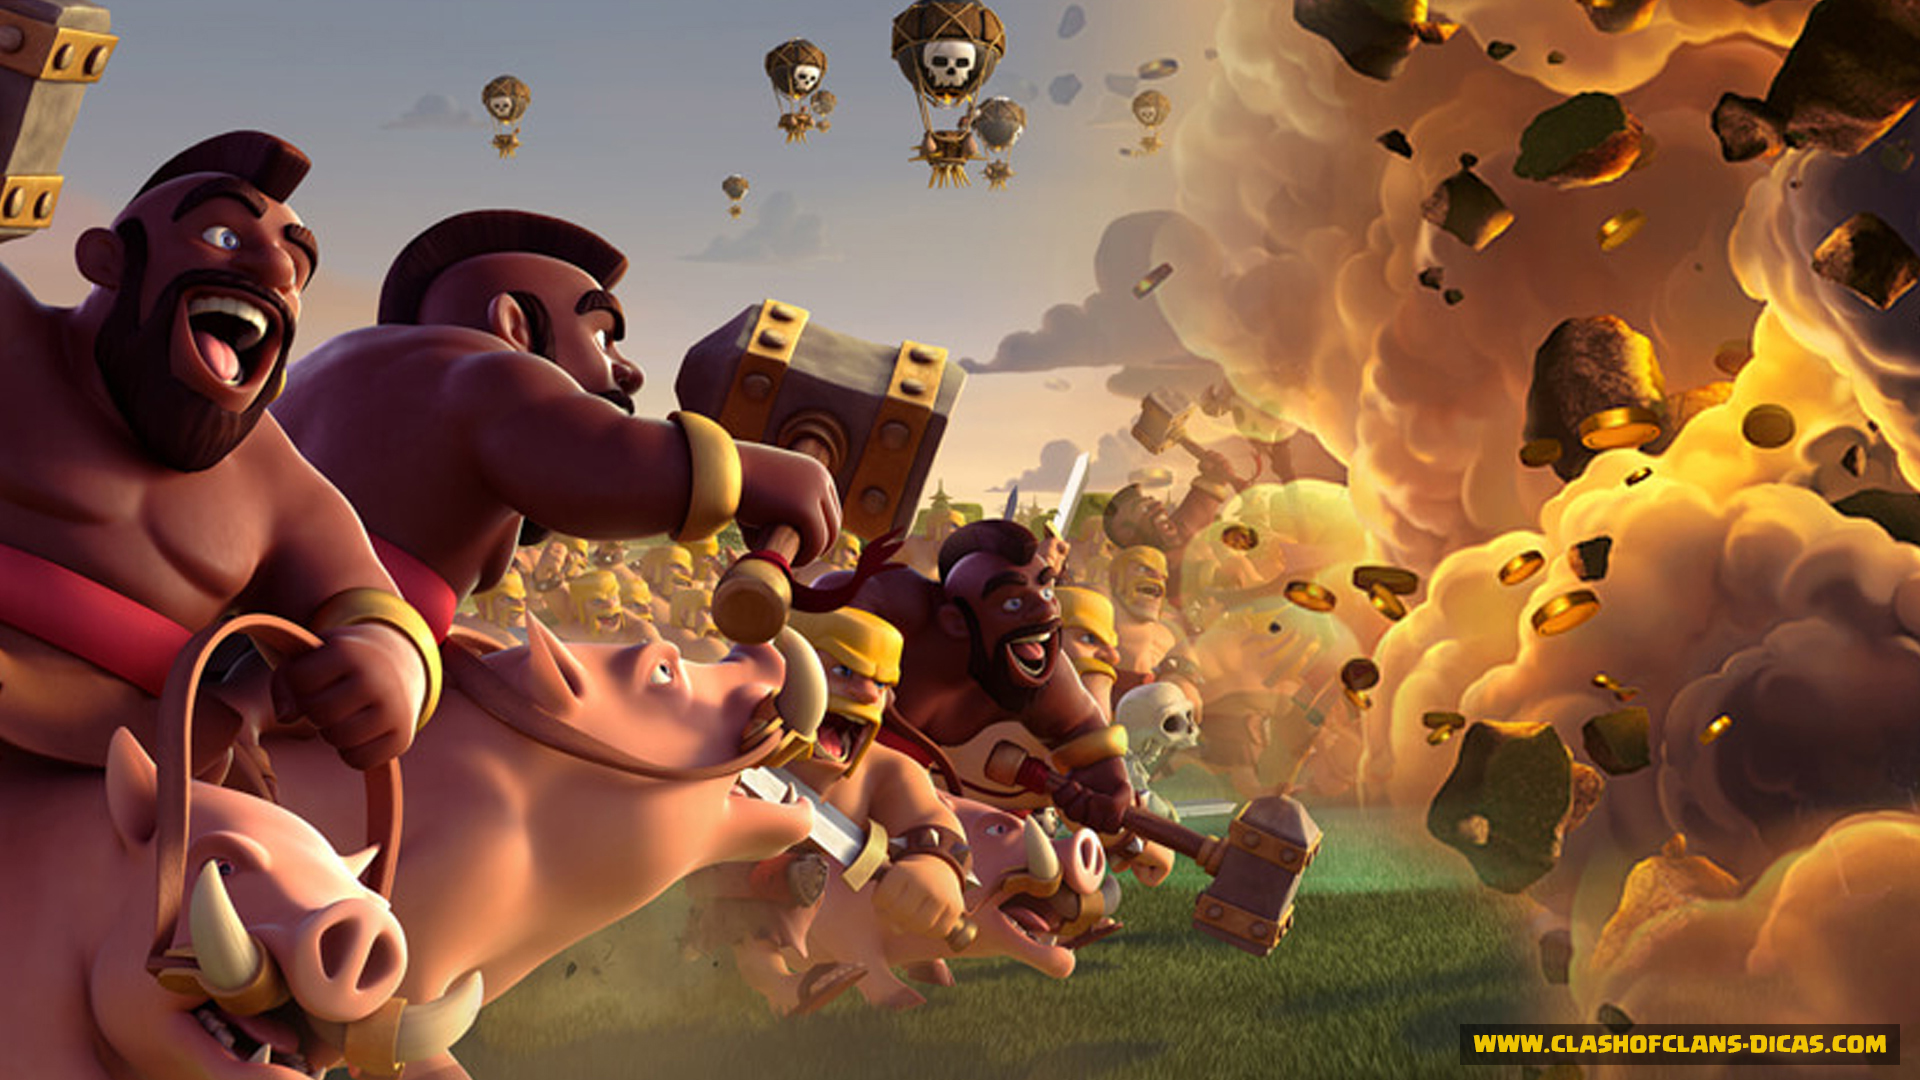 Clash of clans wallpapers